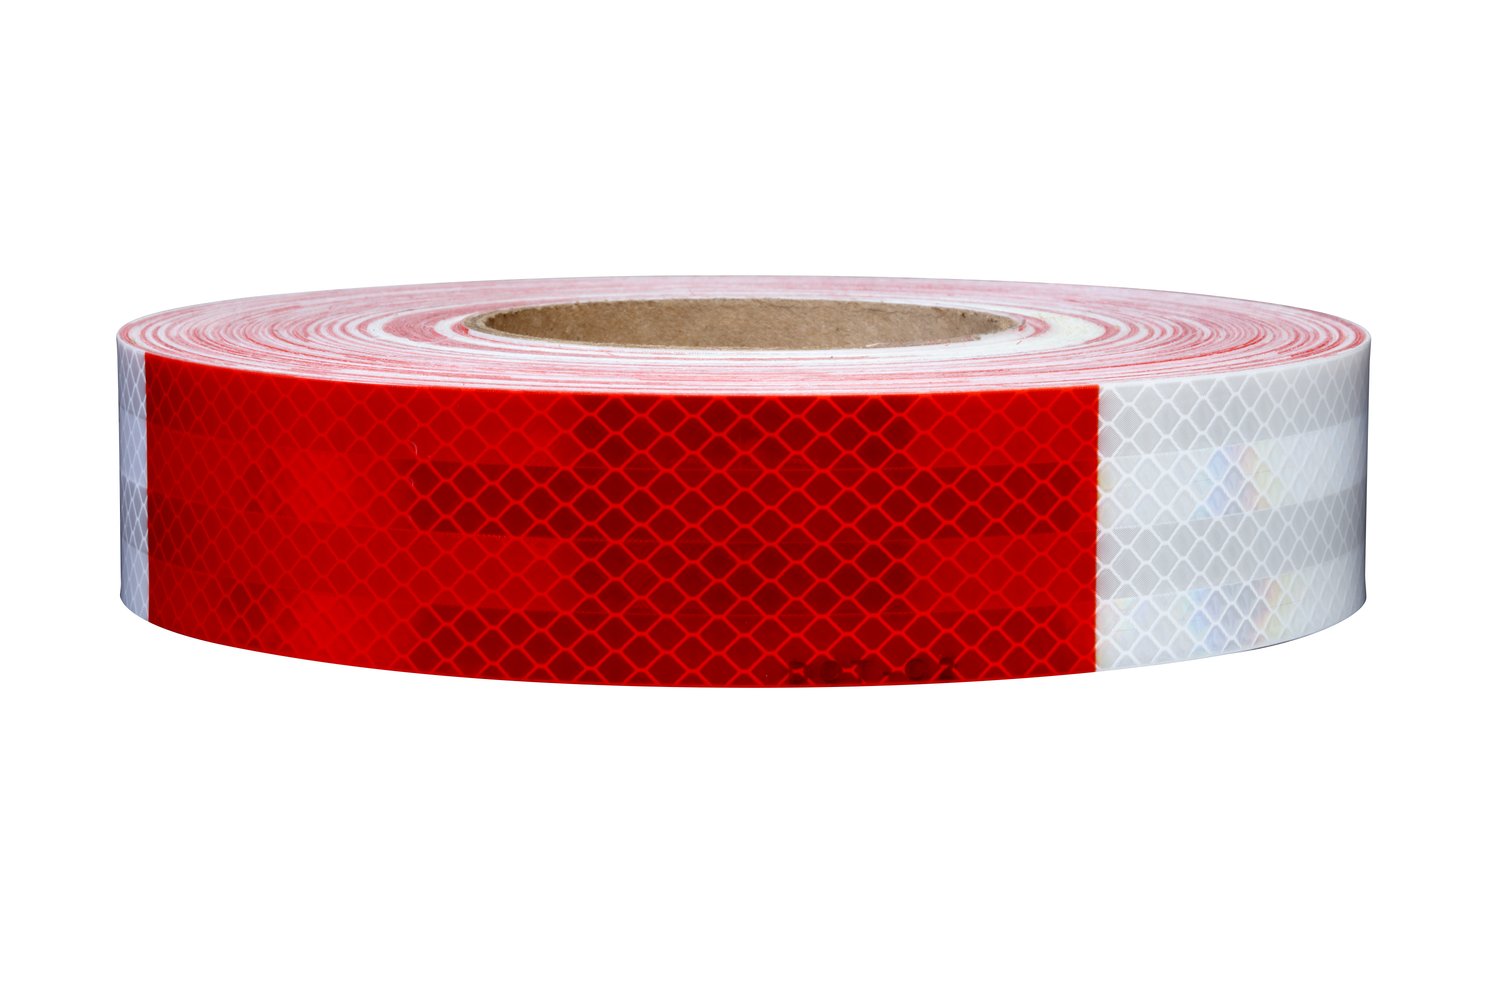 7100113672 - 3M Diamond Grade Conspicuity Markings 983-326, Red/White, 6 in Red/6
in White, Roll Configurable